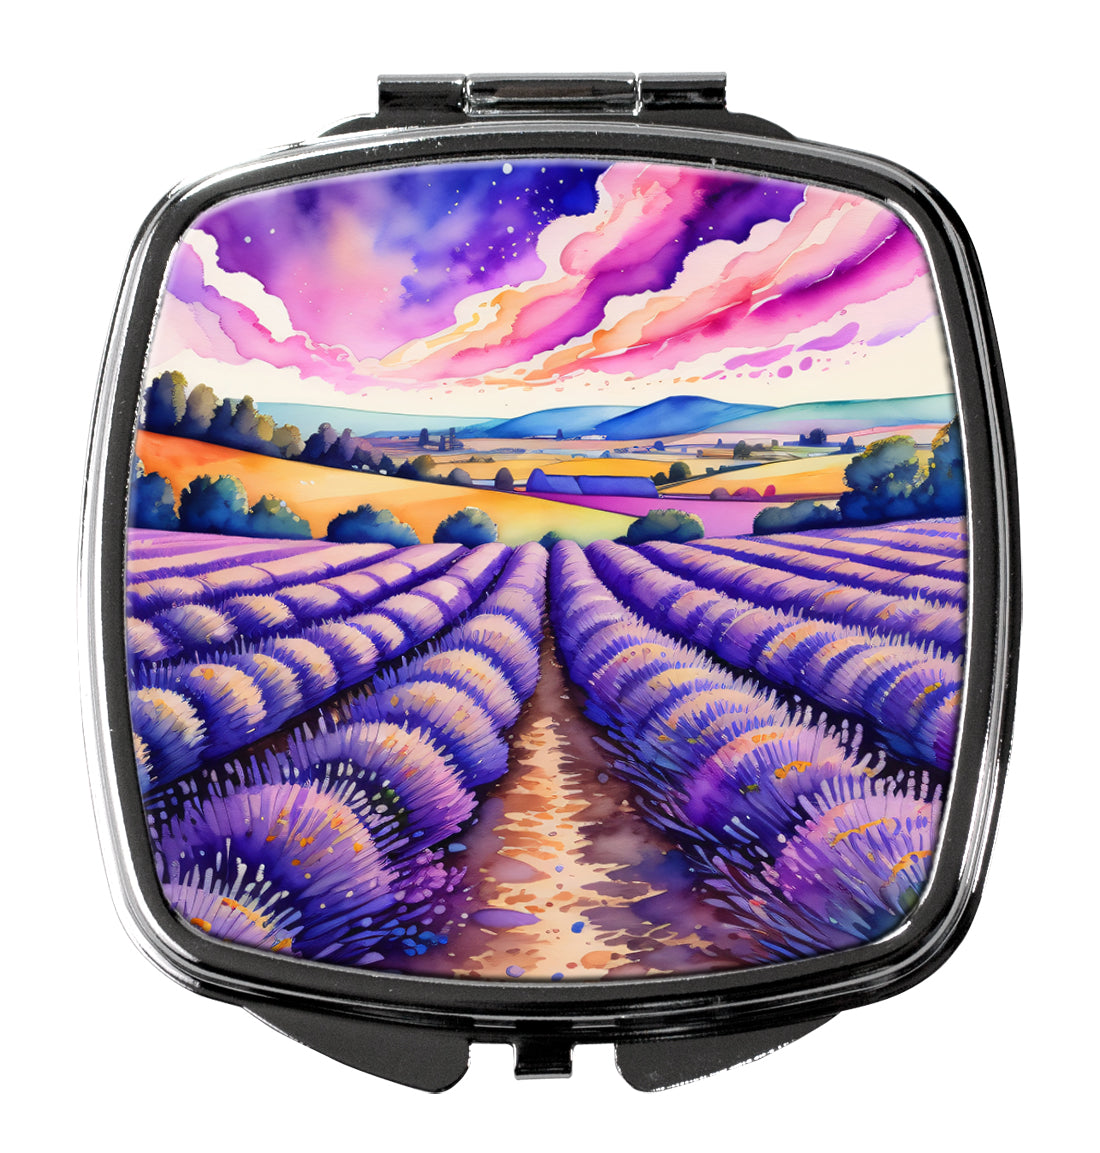 Buy this Colorful English Lavender Compact Mirror